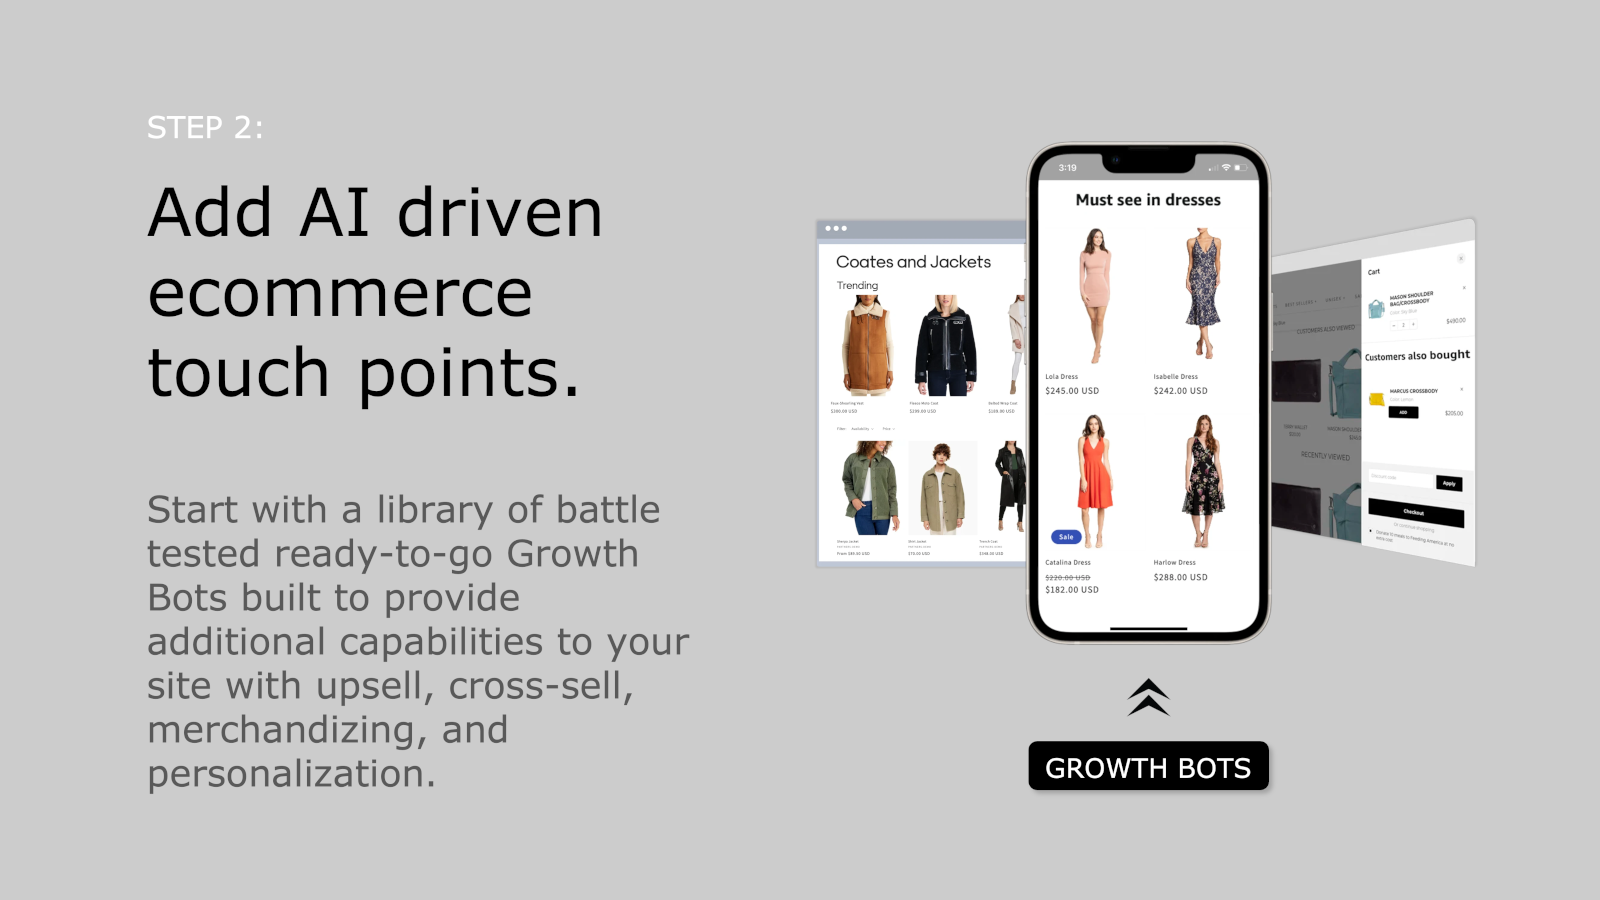 Add AI driven ecommerce touch points.